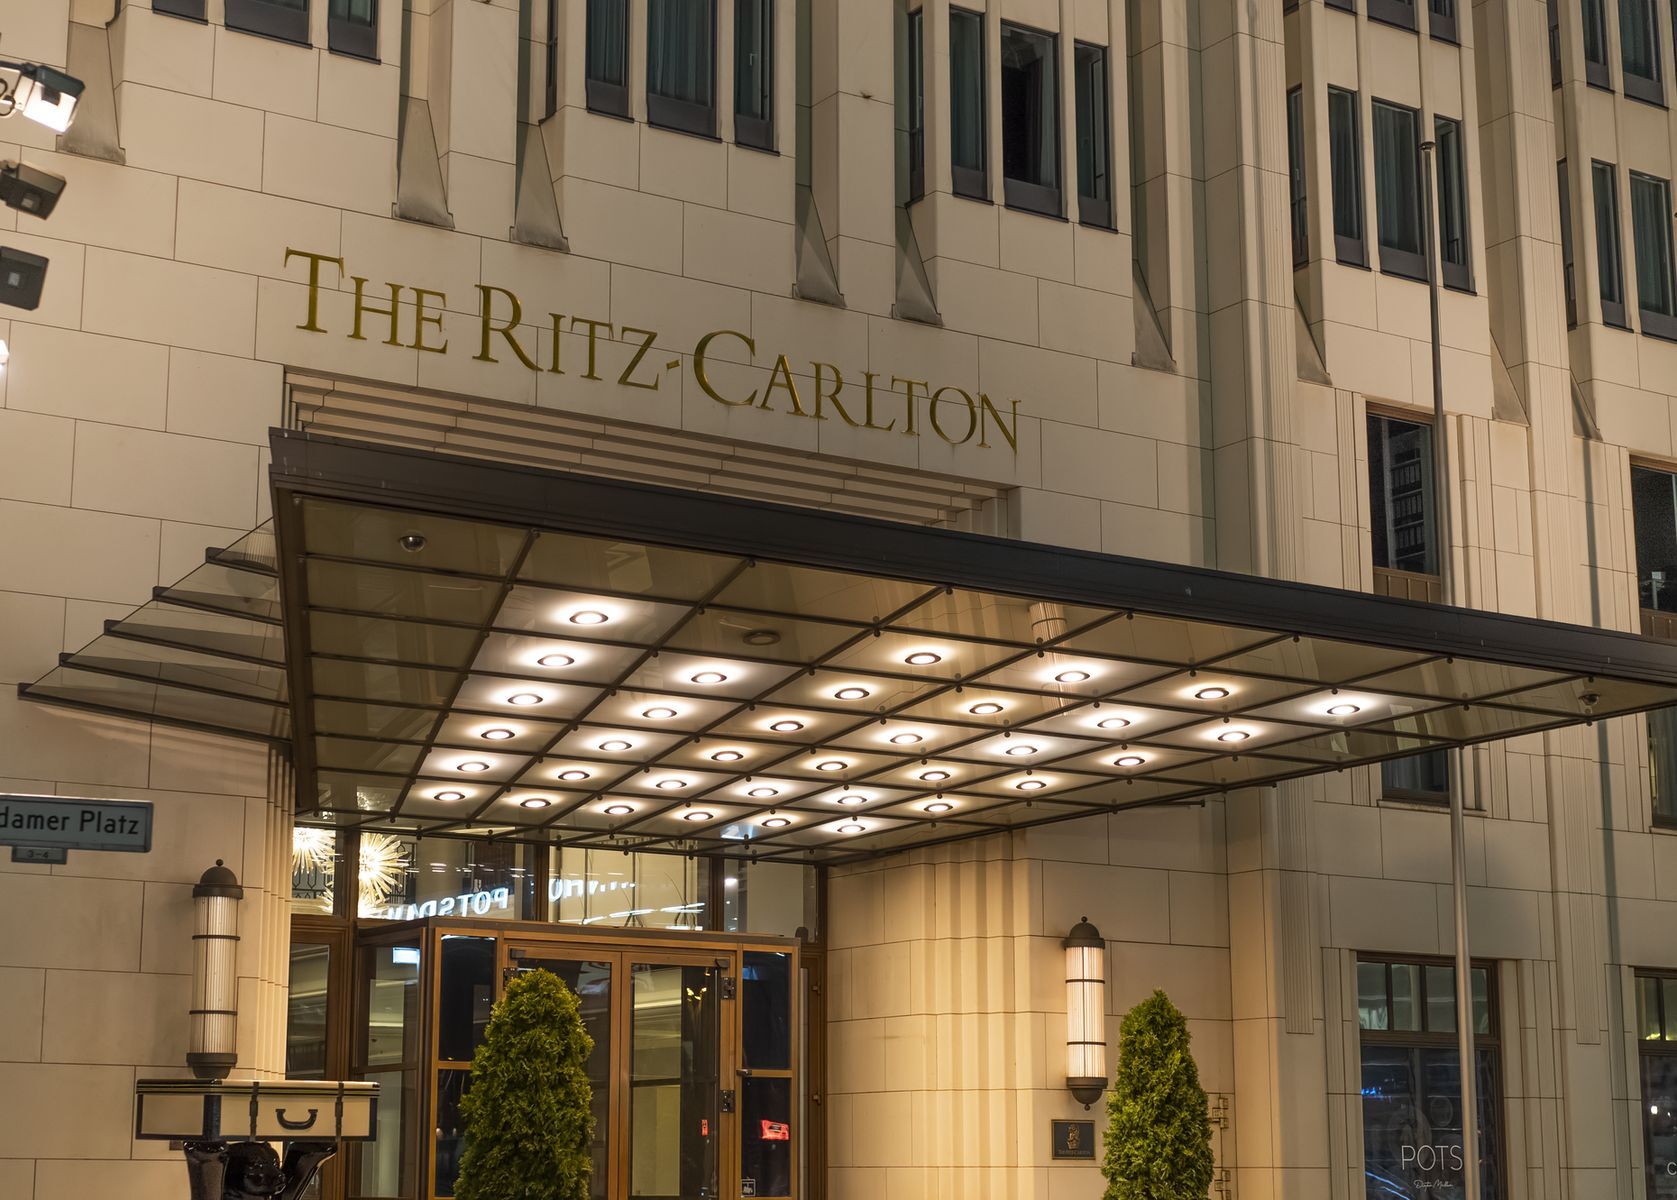 <p>While Holiday Inn may draw in guests for its relative affordability, the Ritz-Carlton prefers to appeal to those seeking a pampered stay with luxurious accommodations. The brand famously <a href="https://www.forbes.com/sites/micahsolomon/2015/01/15/the-amazing-true-story-of-the-hotel-that-saved-thomas-the-tank-engine/?sh=67ff4adc230e">encourages employees to spend up to US$2,000</a> to solve customer service issues, ensuring guests are constantly spoiled. </p>